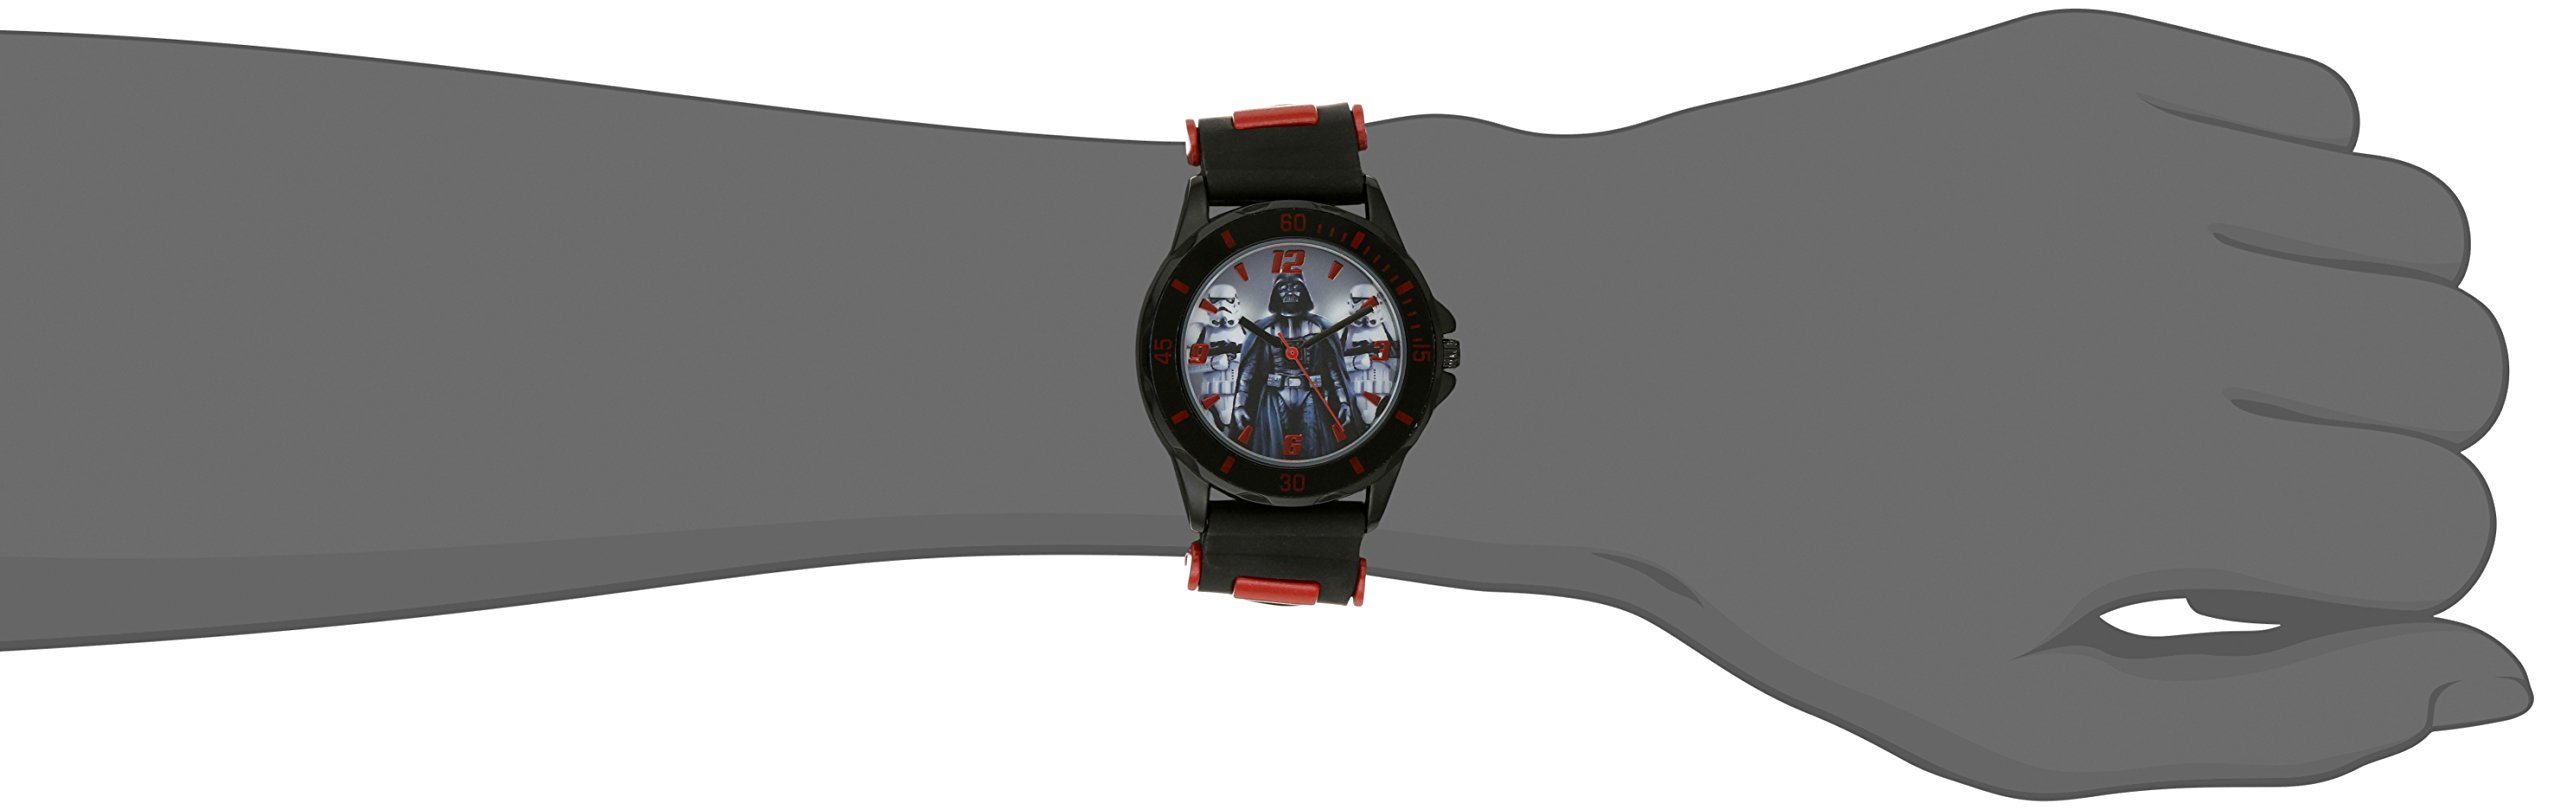 Accutime Kids Star Wars Character Analog Quartz Wrist Watch, Cool Inexpensive Gift & Party Favor for Toddlers, Boys, Girls, Adults All Ages